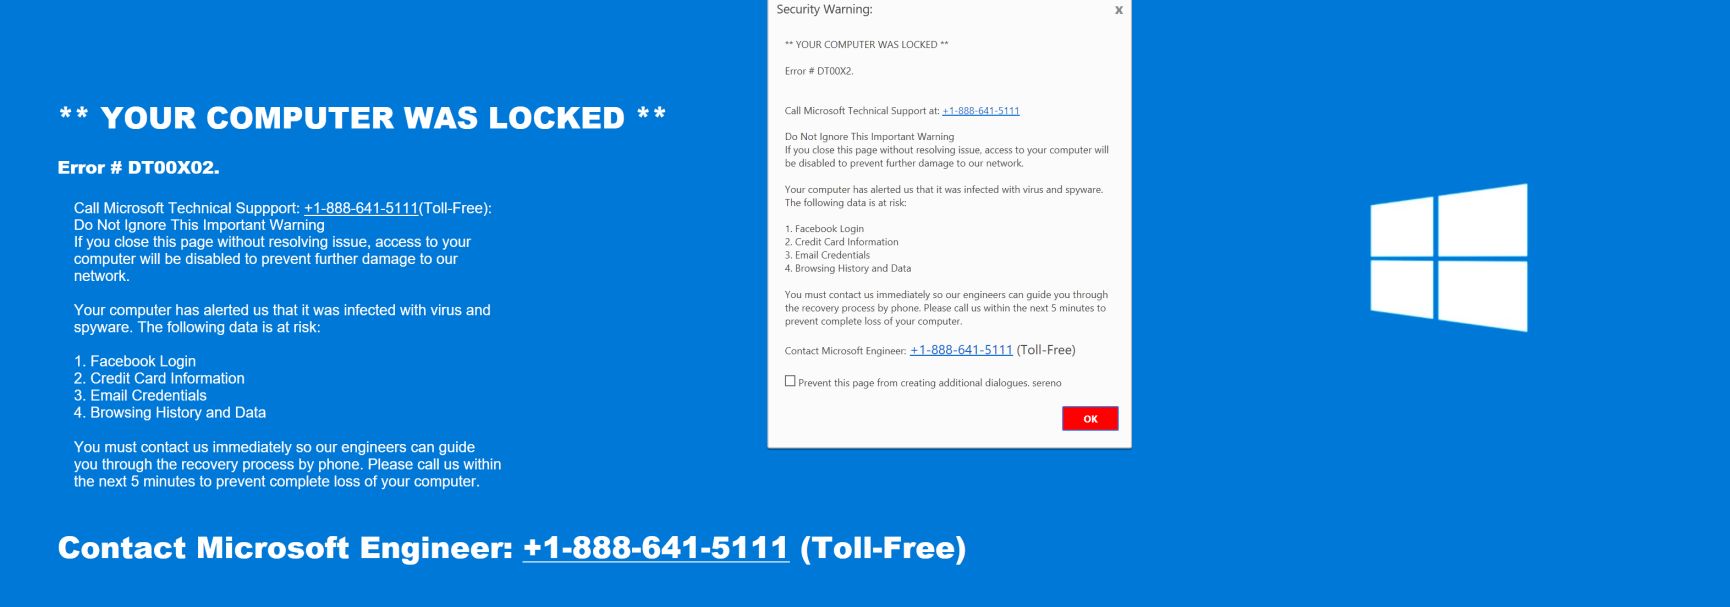 How to tell if a Microsoft email is legitimate - U-neek Computer Services